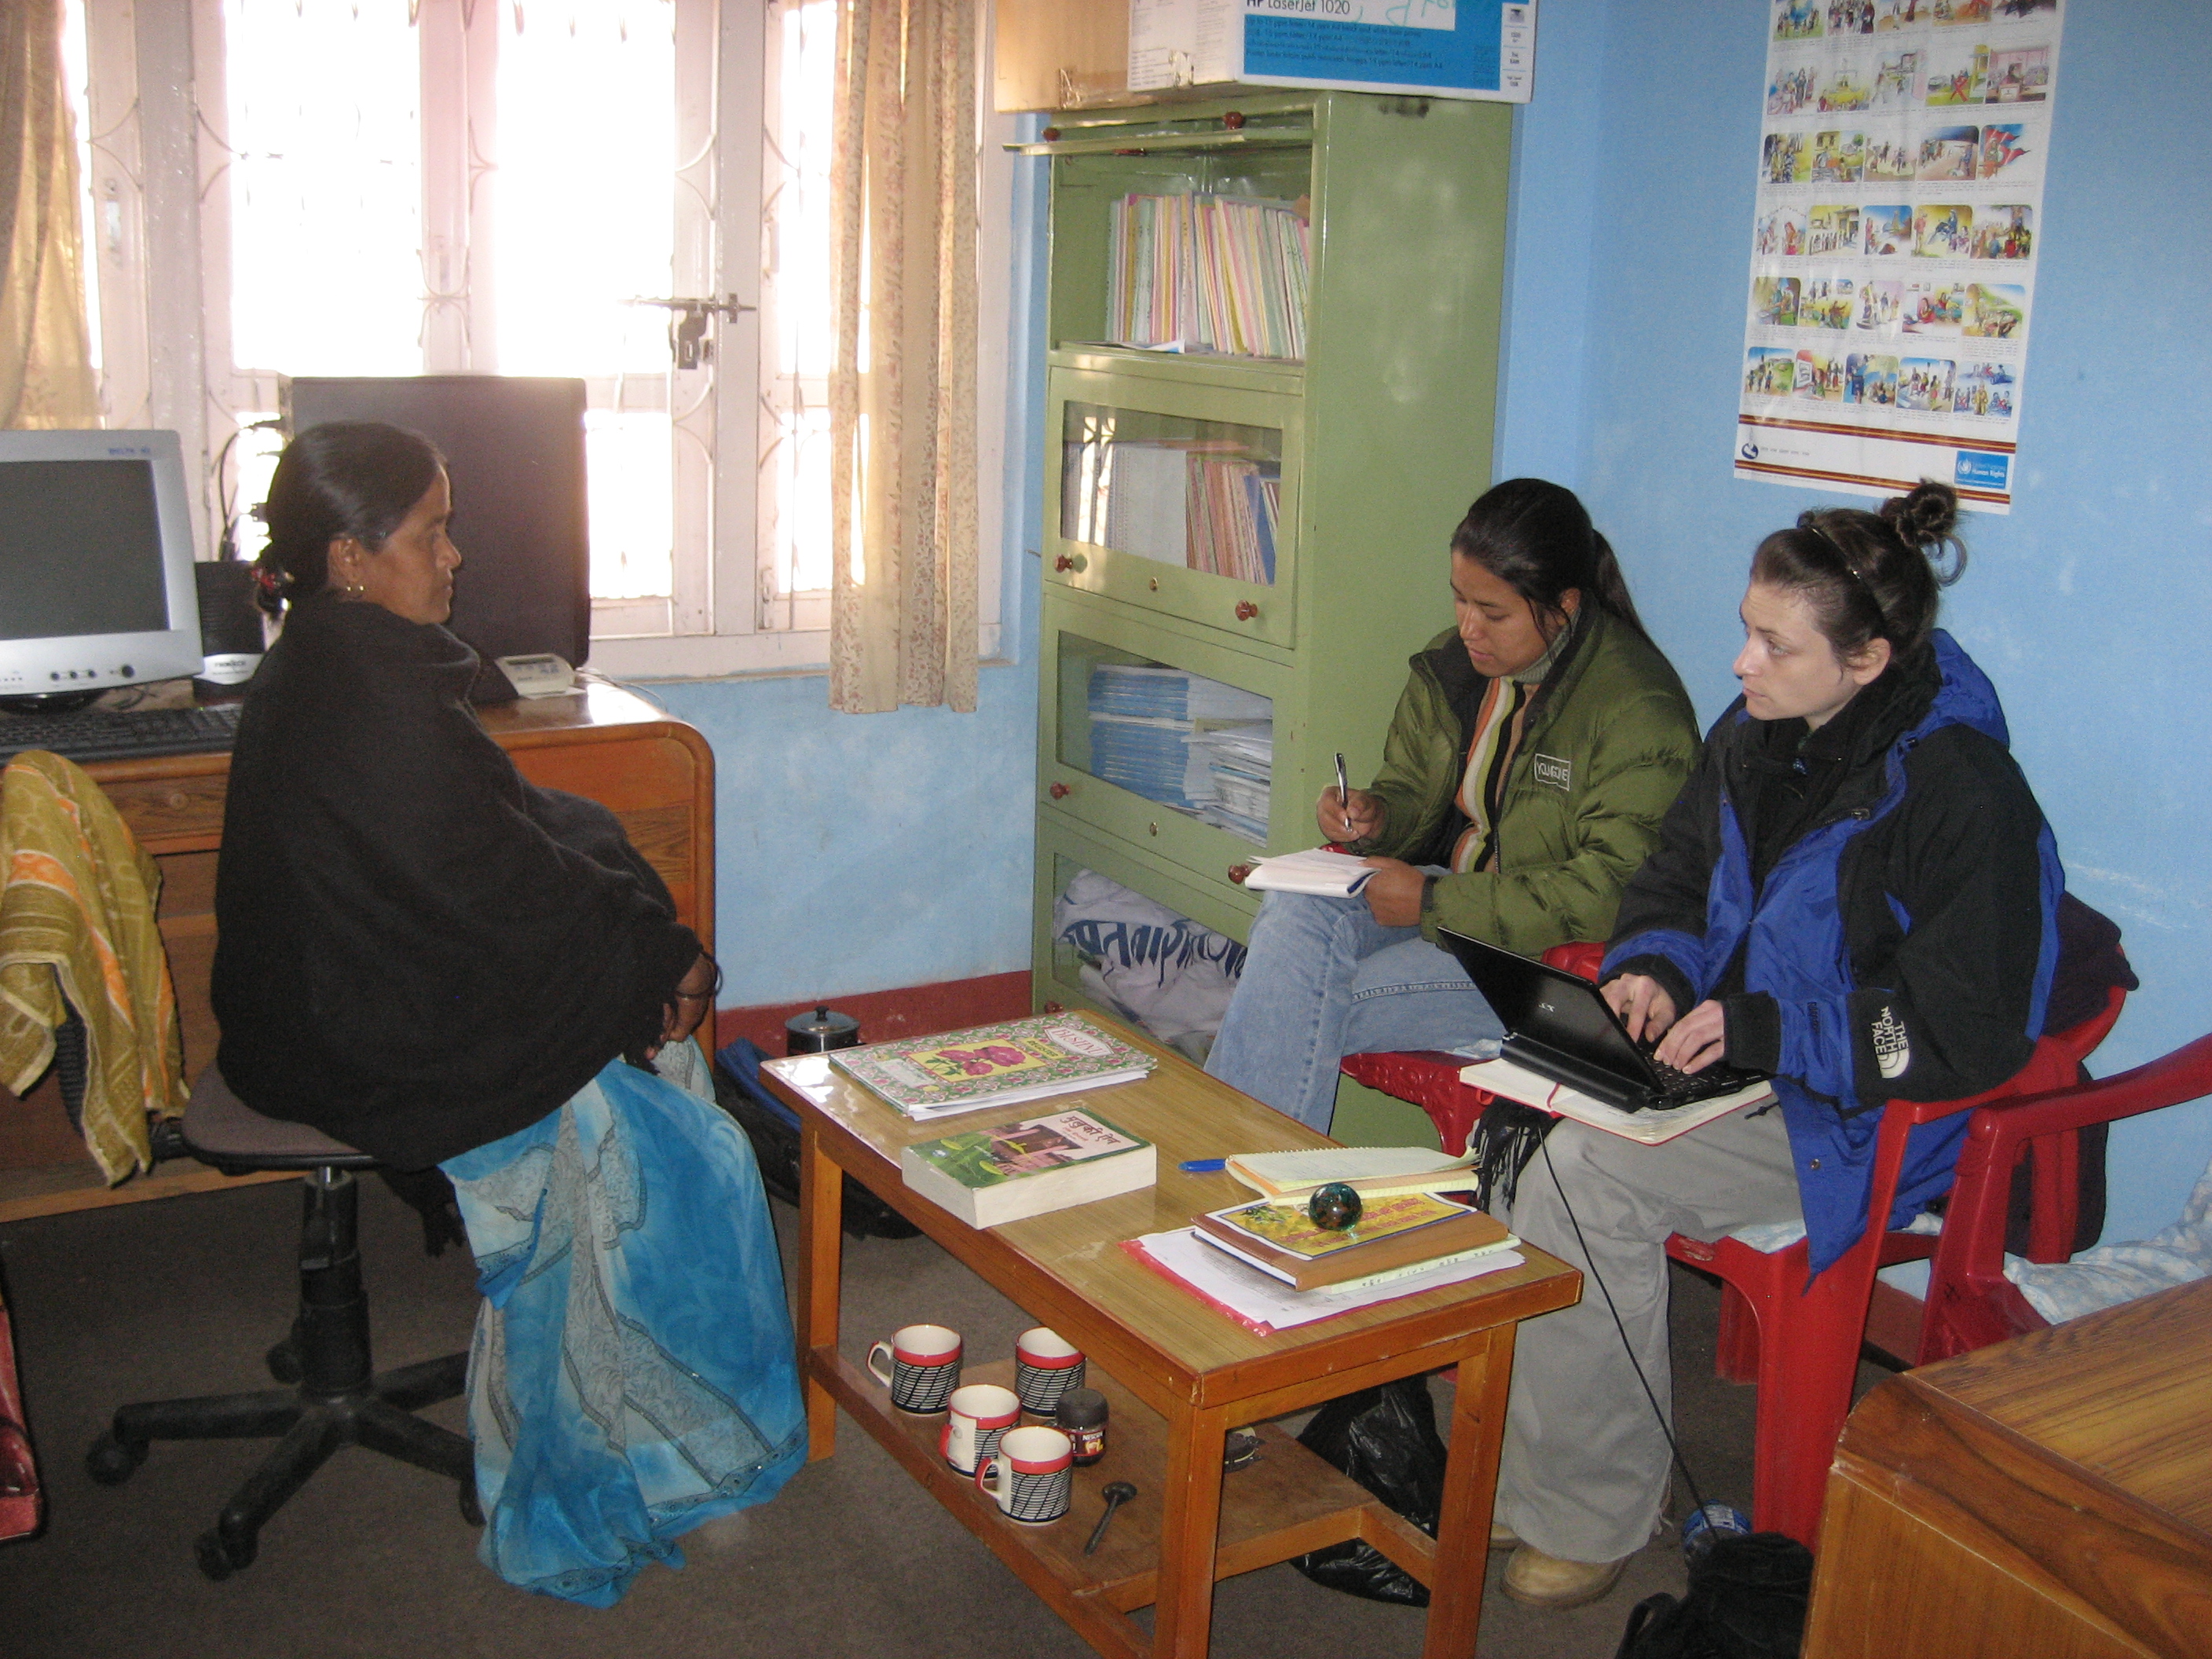 Two students wearing heavy coats interview another woman wearing a long skirt and fleece. There is a computer behind them, and they look to be a in an office setting.